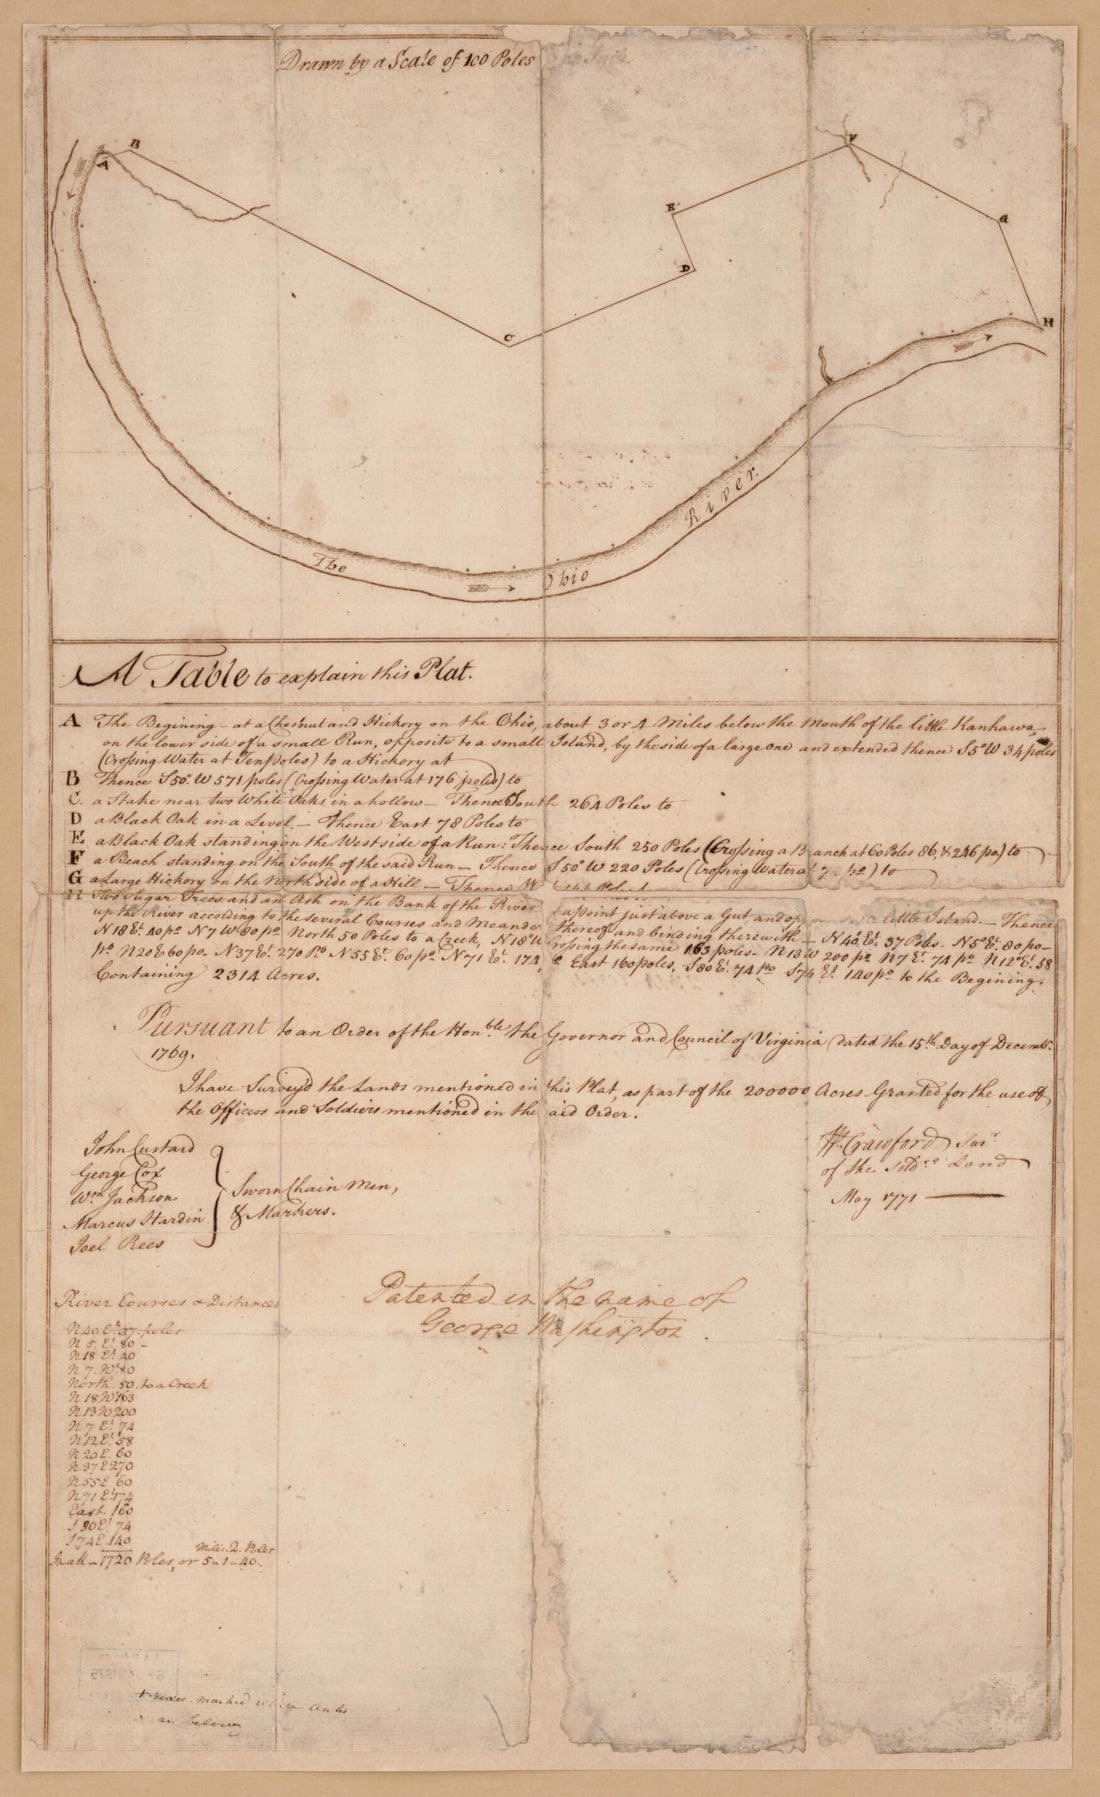 This old map of Plat of a Survey of 2,314 Acres of Land, Being the First Large Bottom On the East Side of the Ohio River, 3 Or 4 Miles Below the Mouth, a Portion of Which Is Divided Into 17 Lots from 1771 was created by William Crawford, George Washingto